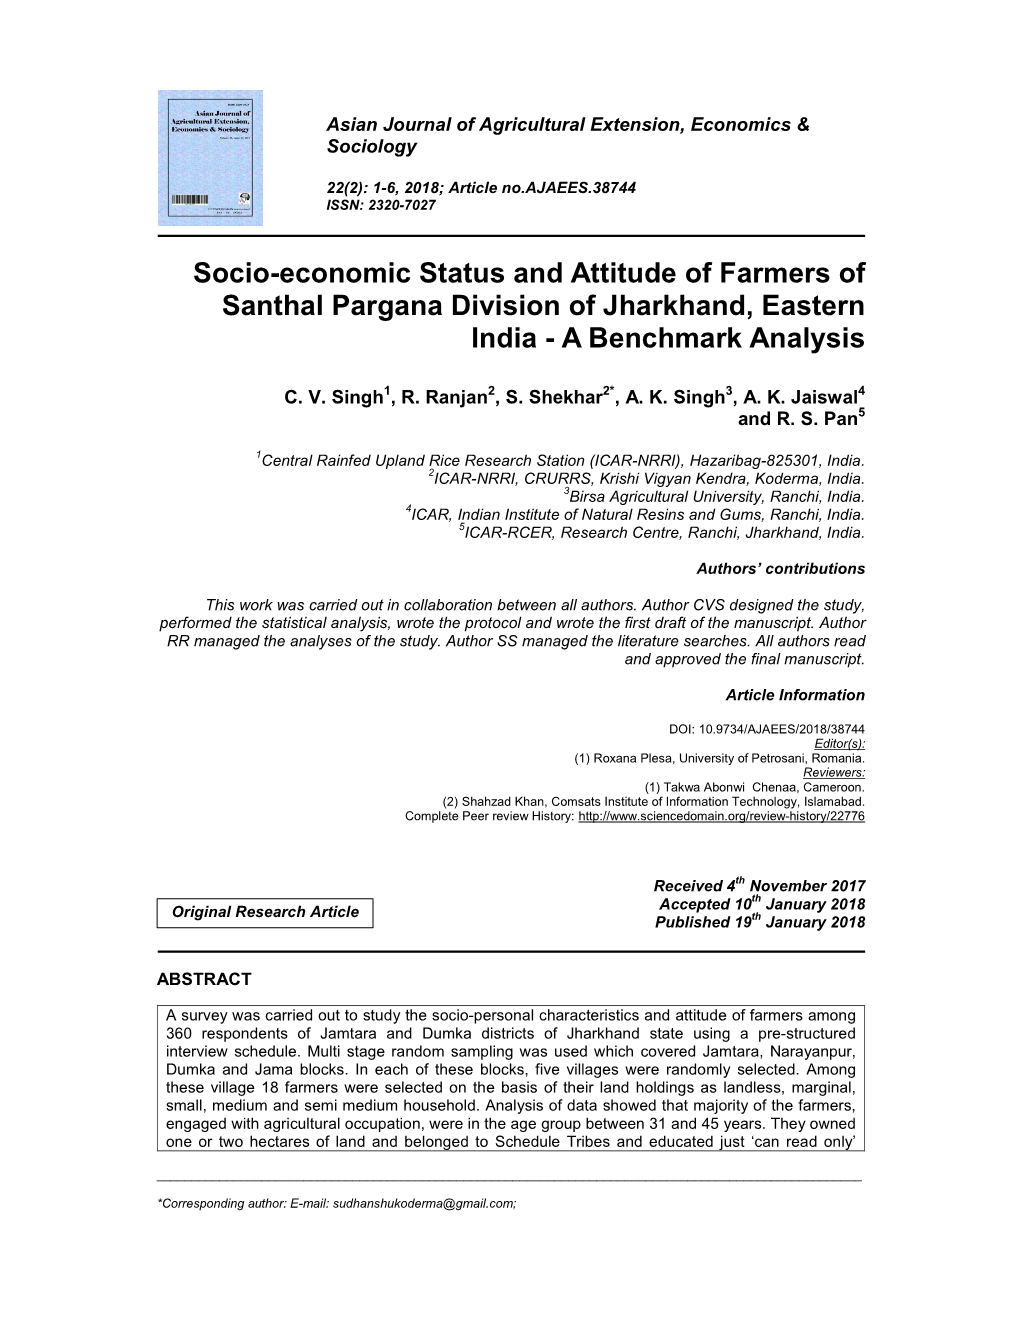 Socio-Economic Status and Attitude of Farmers of Santhal Pargana Division of Jharkhand, Eastern India - a Benchmark Analysis